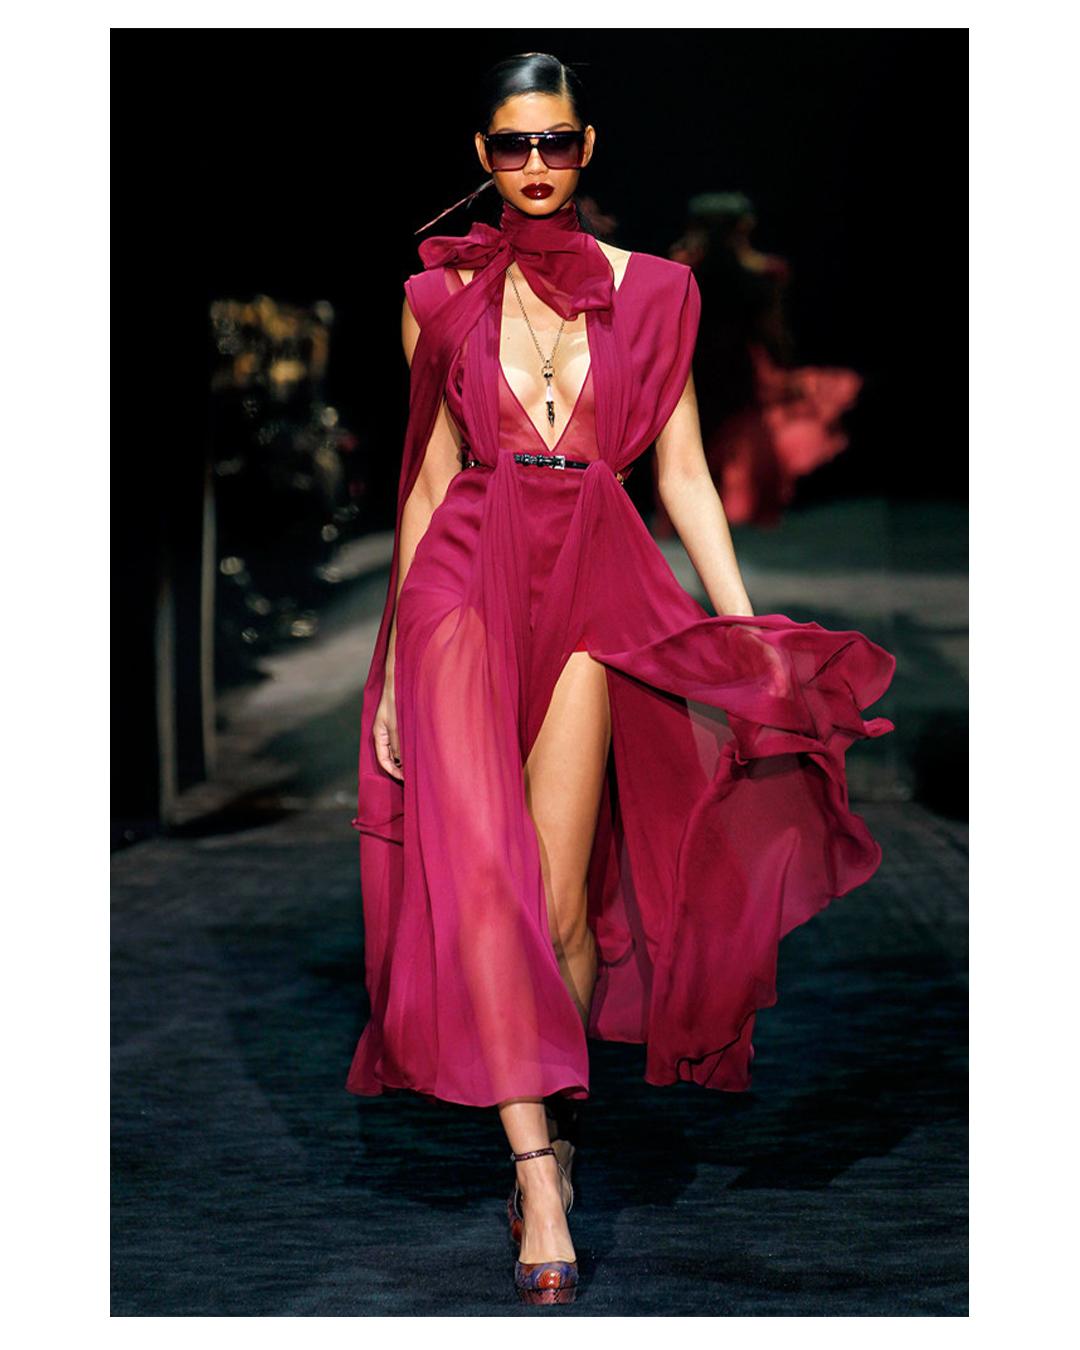 LOVE LALI Vintage

Gucci Fall 2011 midi length dress in burgundy
Sleeveless cut
Crinkle effect chiffon fabric
Partly sheer
Layered skirt
Long ties can be wrapped around the waist or the neck as seen on the runway
Concealed side zip
Gucci engraved